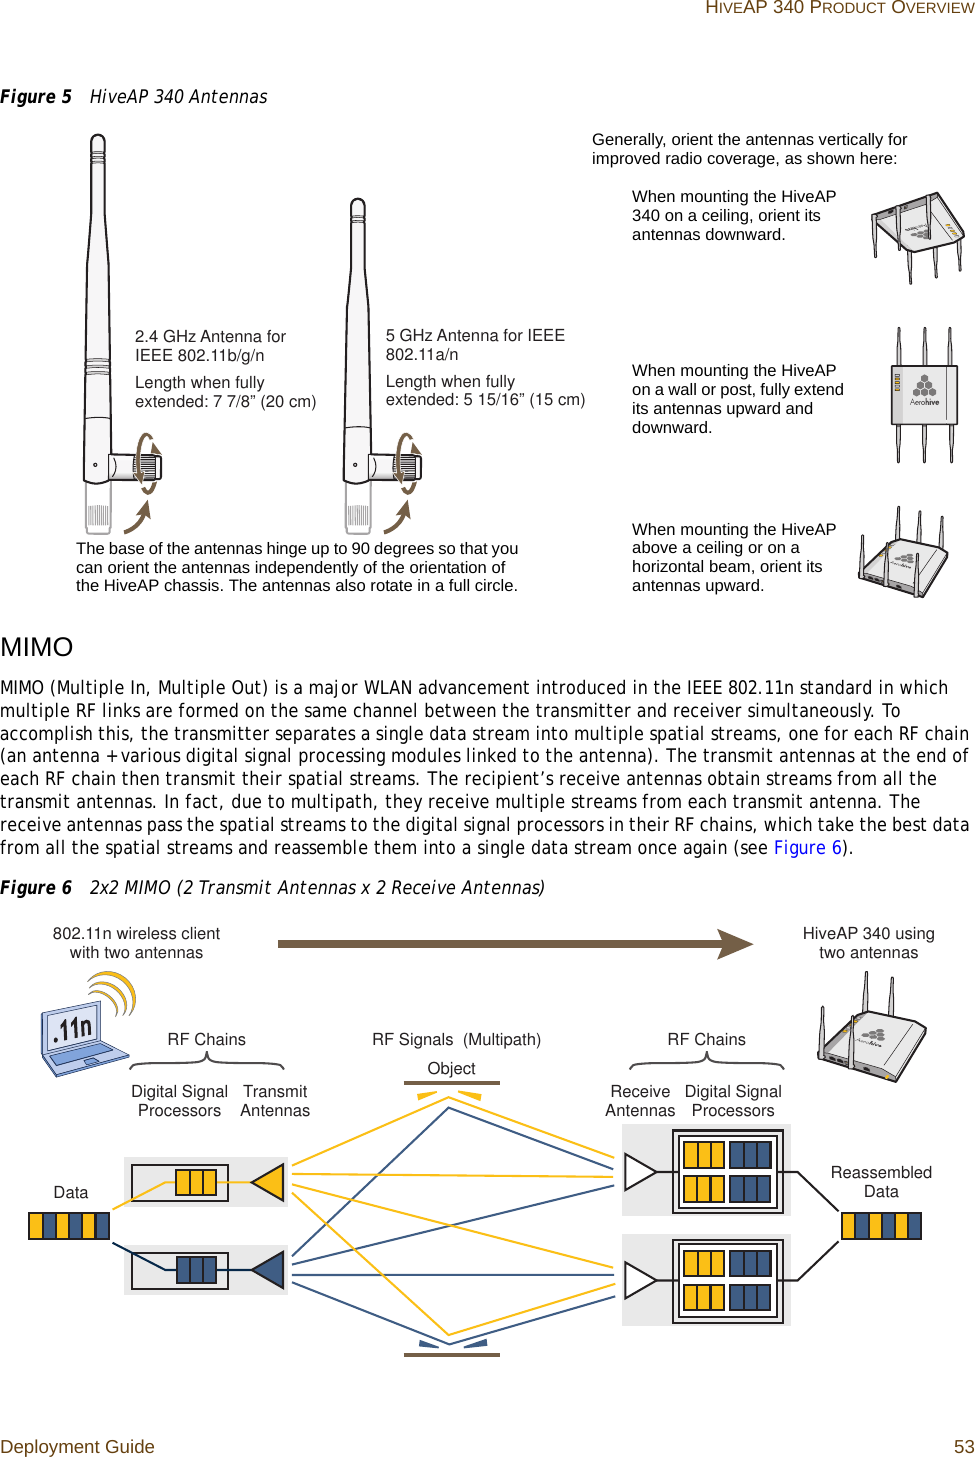 Deployment Guide 53 HIVEAP 340 PRODUCT OVERVIEWFigure 5  HiveAP 340 AntennasMIMOMIMO (Multiple In, Multiple Out) is a major WLAN advancement introduced in the IEEE 802.11n standard in which multiple RF links are formed on the same channel between the transmitter and receiver simultaneously. To accomplish this, the transmitter separates a single data stream into multiple spatial streams, one for each RF chain (an antenna + various digital signal processing modules linked to the antenna). The transmit antennas at the end of each RF chain then transmit their spatial streams. The recipient’s receive antennas obtain streams from all the transmit antennas. In fact, due to multipath, they receive multiple streams from each transmit antenna. The receive antennas pass the spatial streams to the digital signal processors in their RF chains, which take the best data from all the spatial streams and reassemble them into a single data stream once again (see Figure 6).Figure 6  2x2 MIMO (2 Transmit Antennas x 2 Receive Antennas)5 GHz Antenna for IEEE 802.11a/nLength when fully extended: 5 15/16” (15 cm)2.4 GHz Antenna for IEEE 802.11b/g/nLength when fully extended: 7 7/8” (20 cm)The base of the antennas hinge up to 90 degrees so that you can orient the antennas independently of the orientation of the HiveAP chassis. The antennas also rotate in a full circle.When mounting the HiveAP 340 on a ceiling, orient its antennas downward.When mounting the HiveAP on a wall or post, fully extend its antennas upward and downward.When mounting the HiveAP above a ceiling or on a horizontal beam, orient its antennas upward.Generally, orient the antennas vertically for improved radio coverage, as shown here:Transmit AntennasDigital Signal ProcessorsRF Chains RF Signals  (Multipath)Receive Antennas Digital Signal ProcessorsRF Chains802.11n wireless client with two antennas HiveAP 340 using two antennasObjectData Reassembled Data